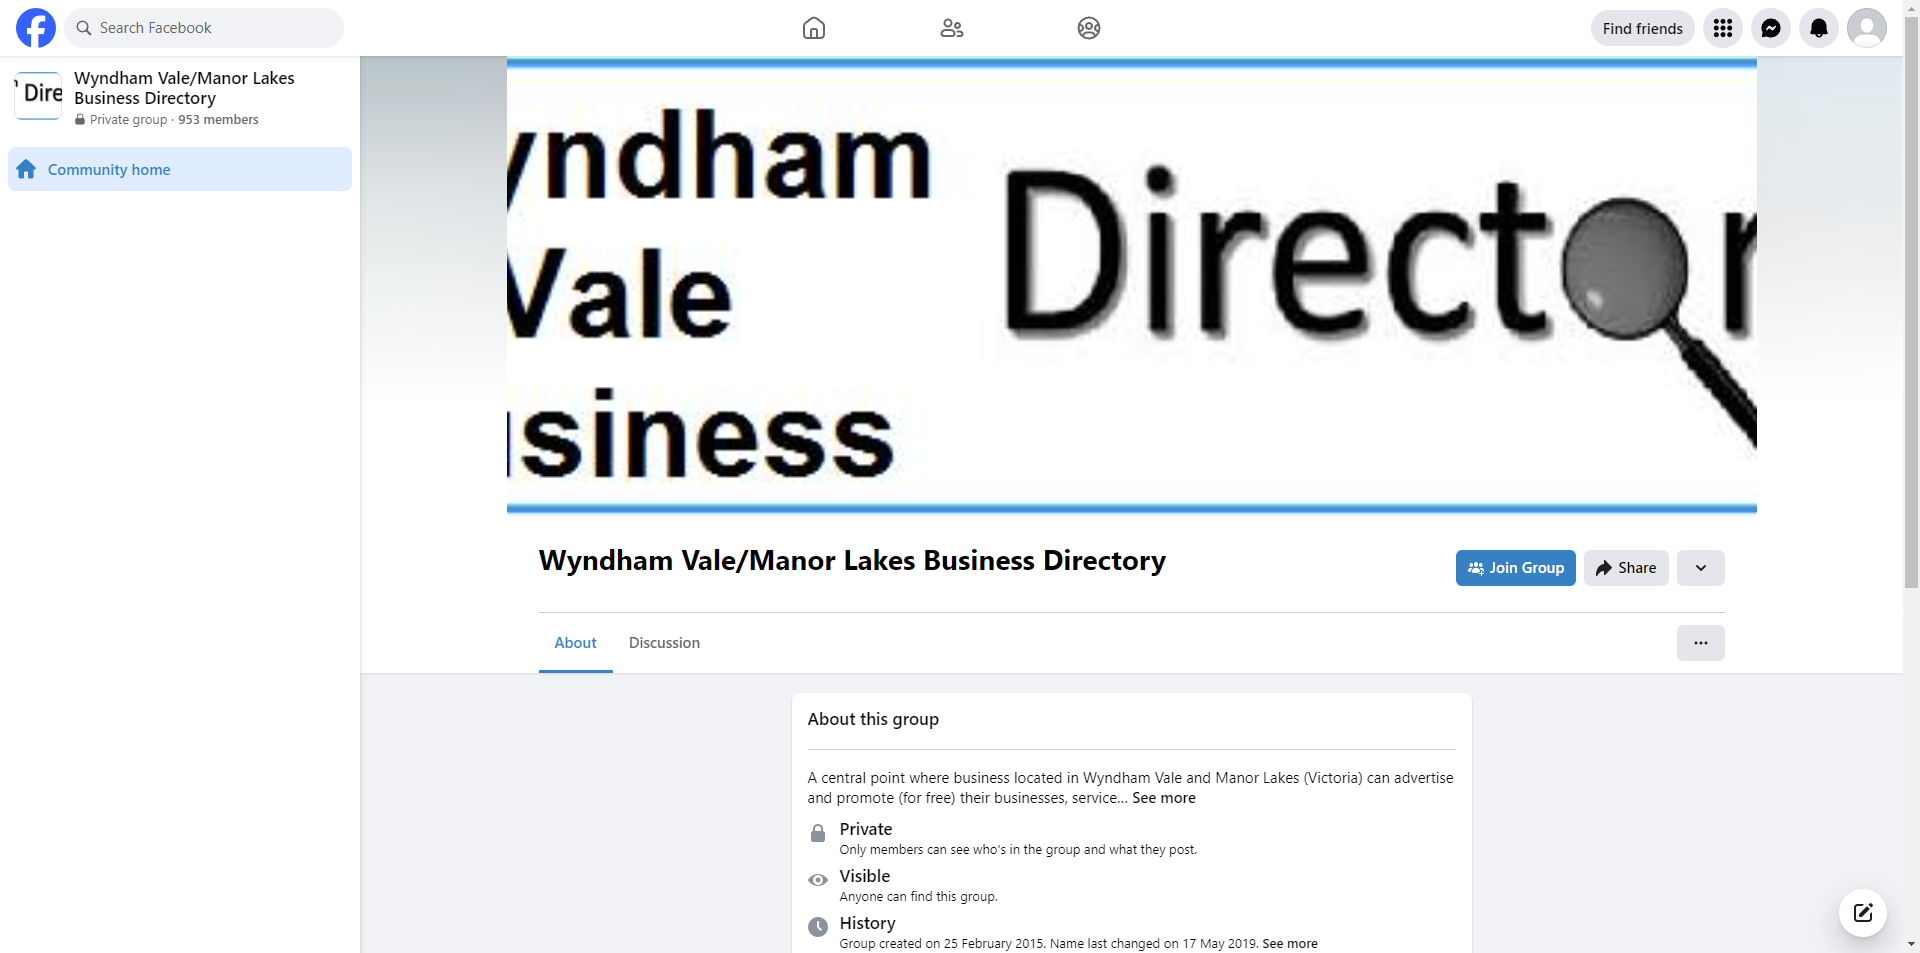 Wyndham Vale/Manor Lakes Business Directory